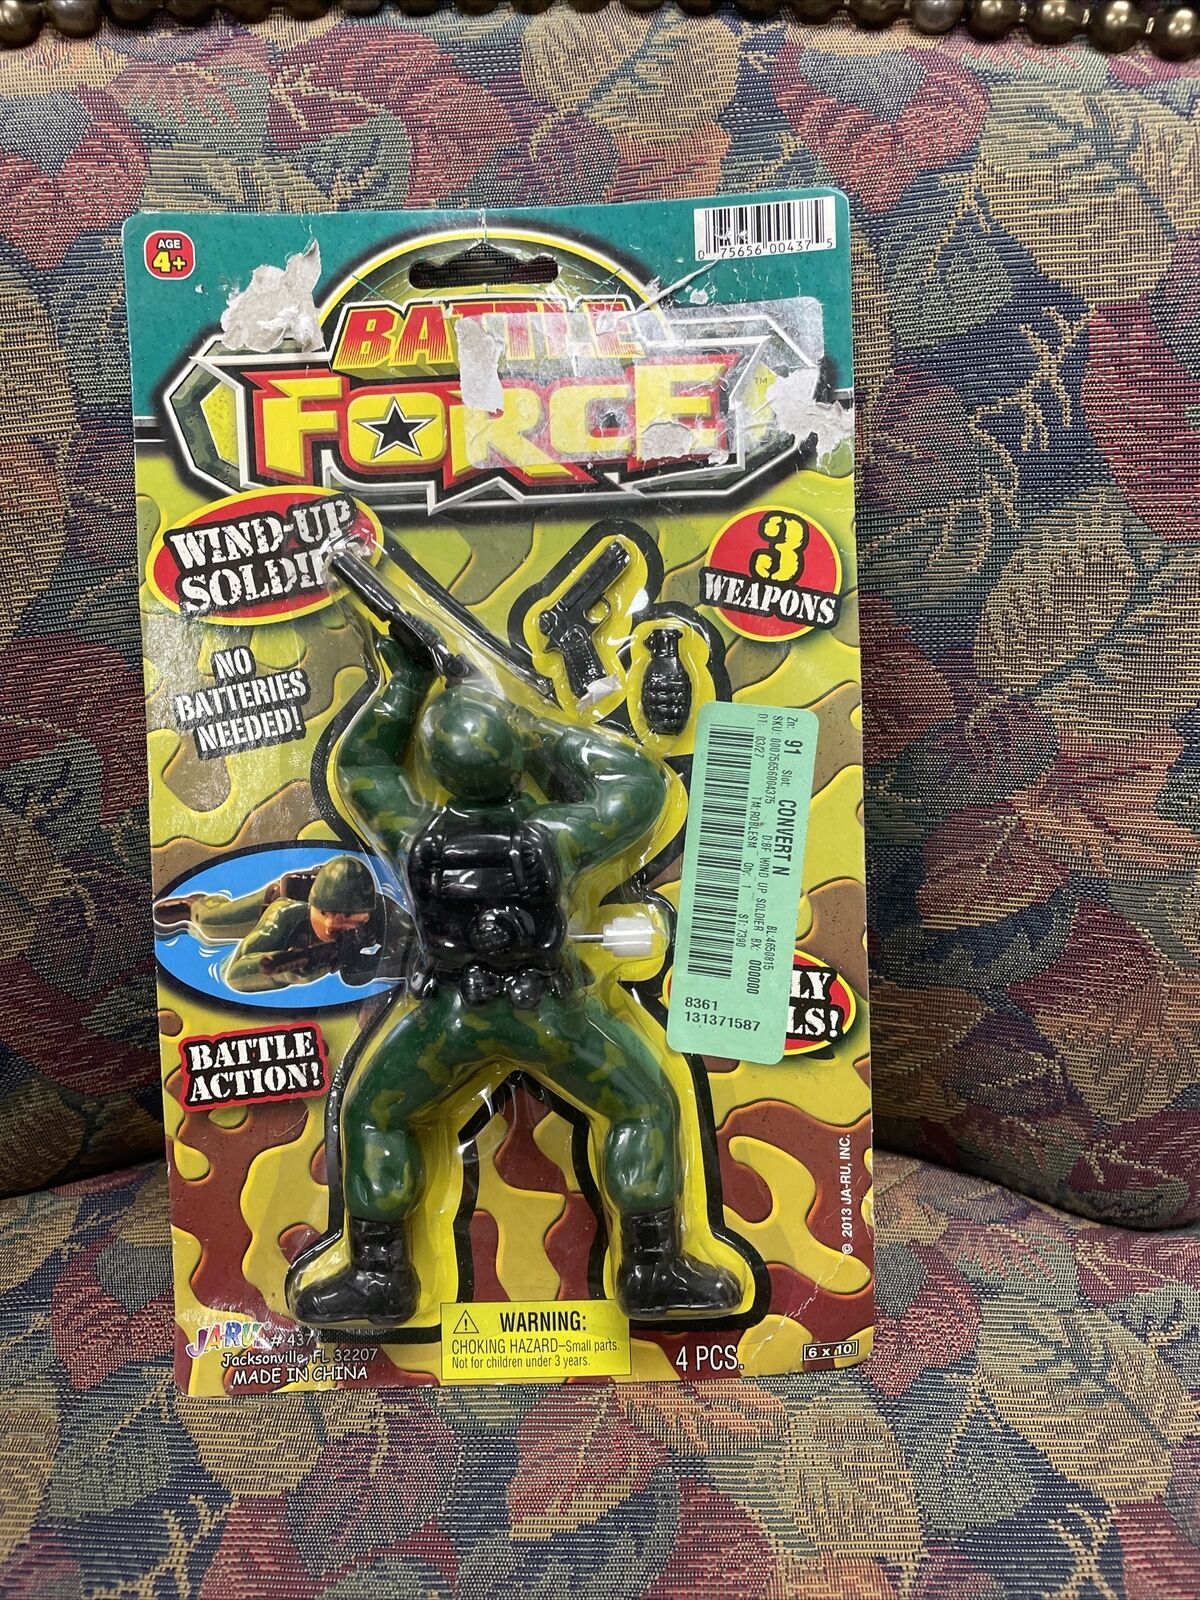 New In Pack Toy Wind Up Soldier By Battle Force Без бренда - фотография #5